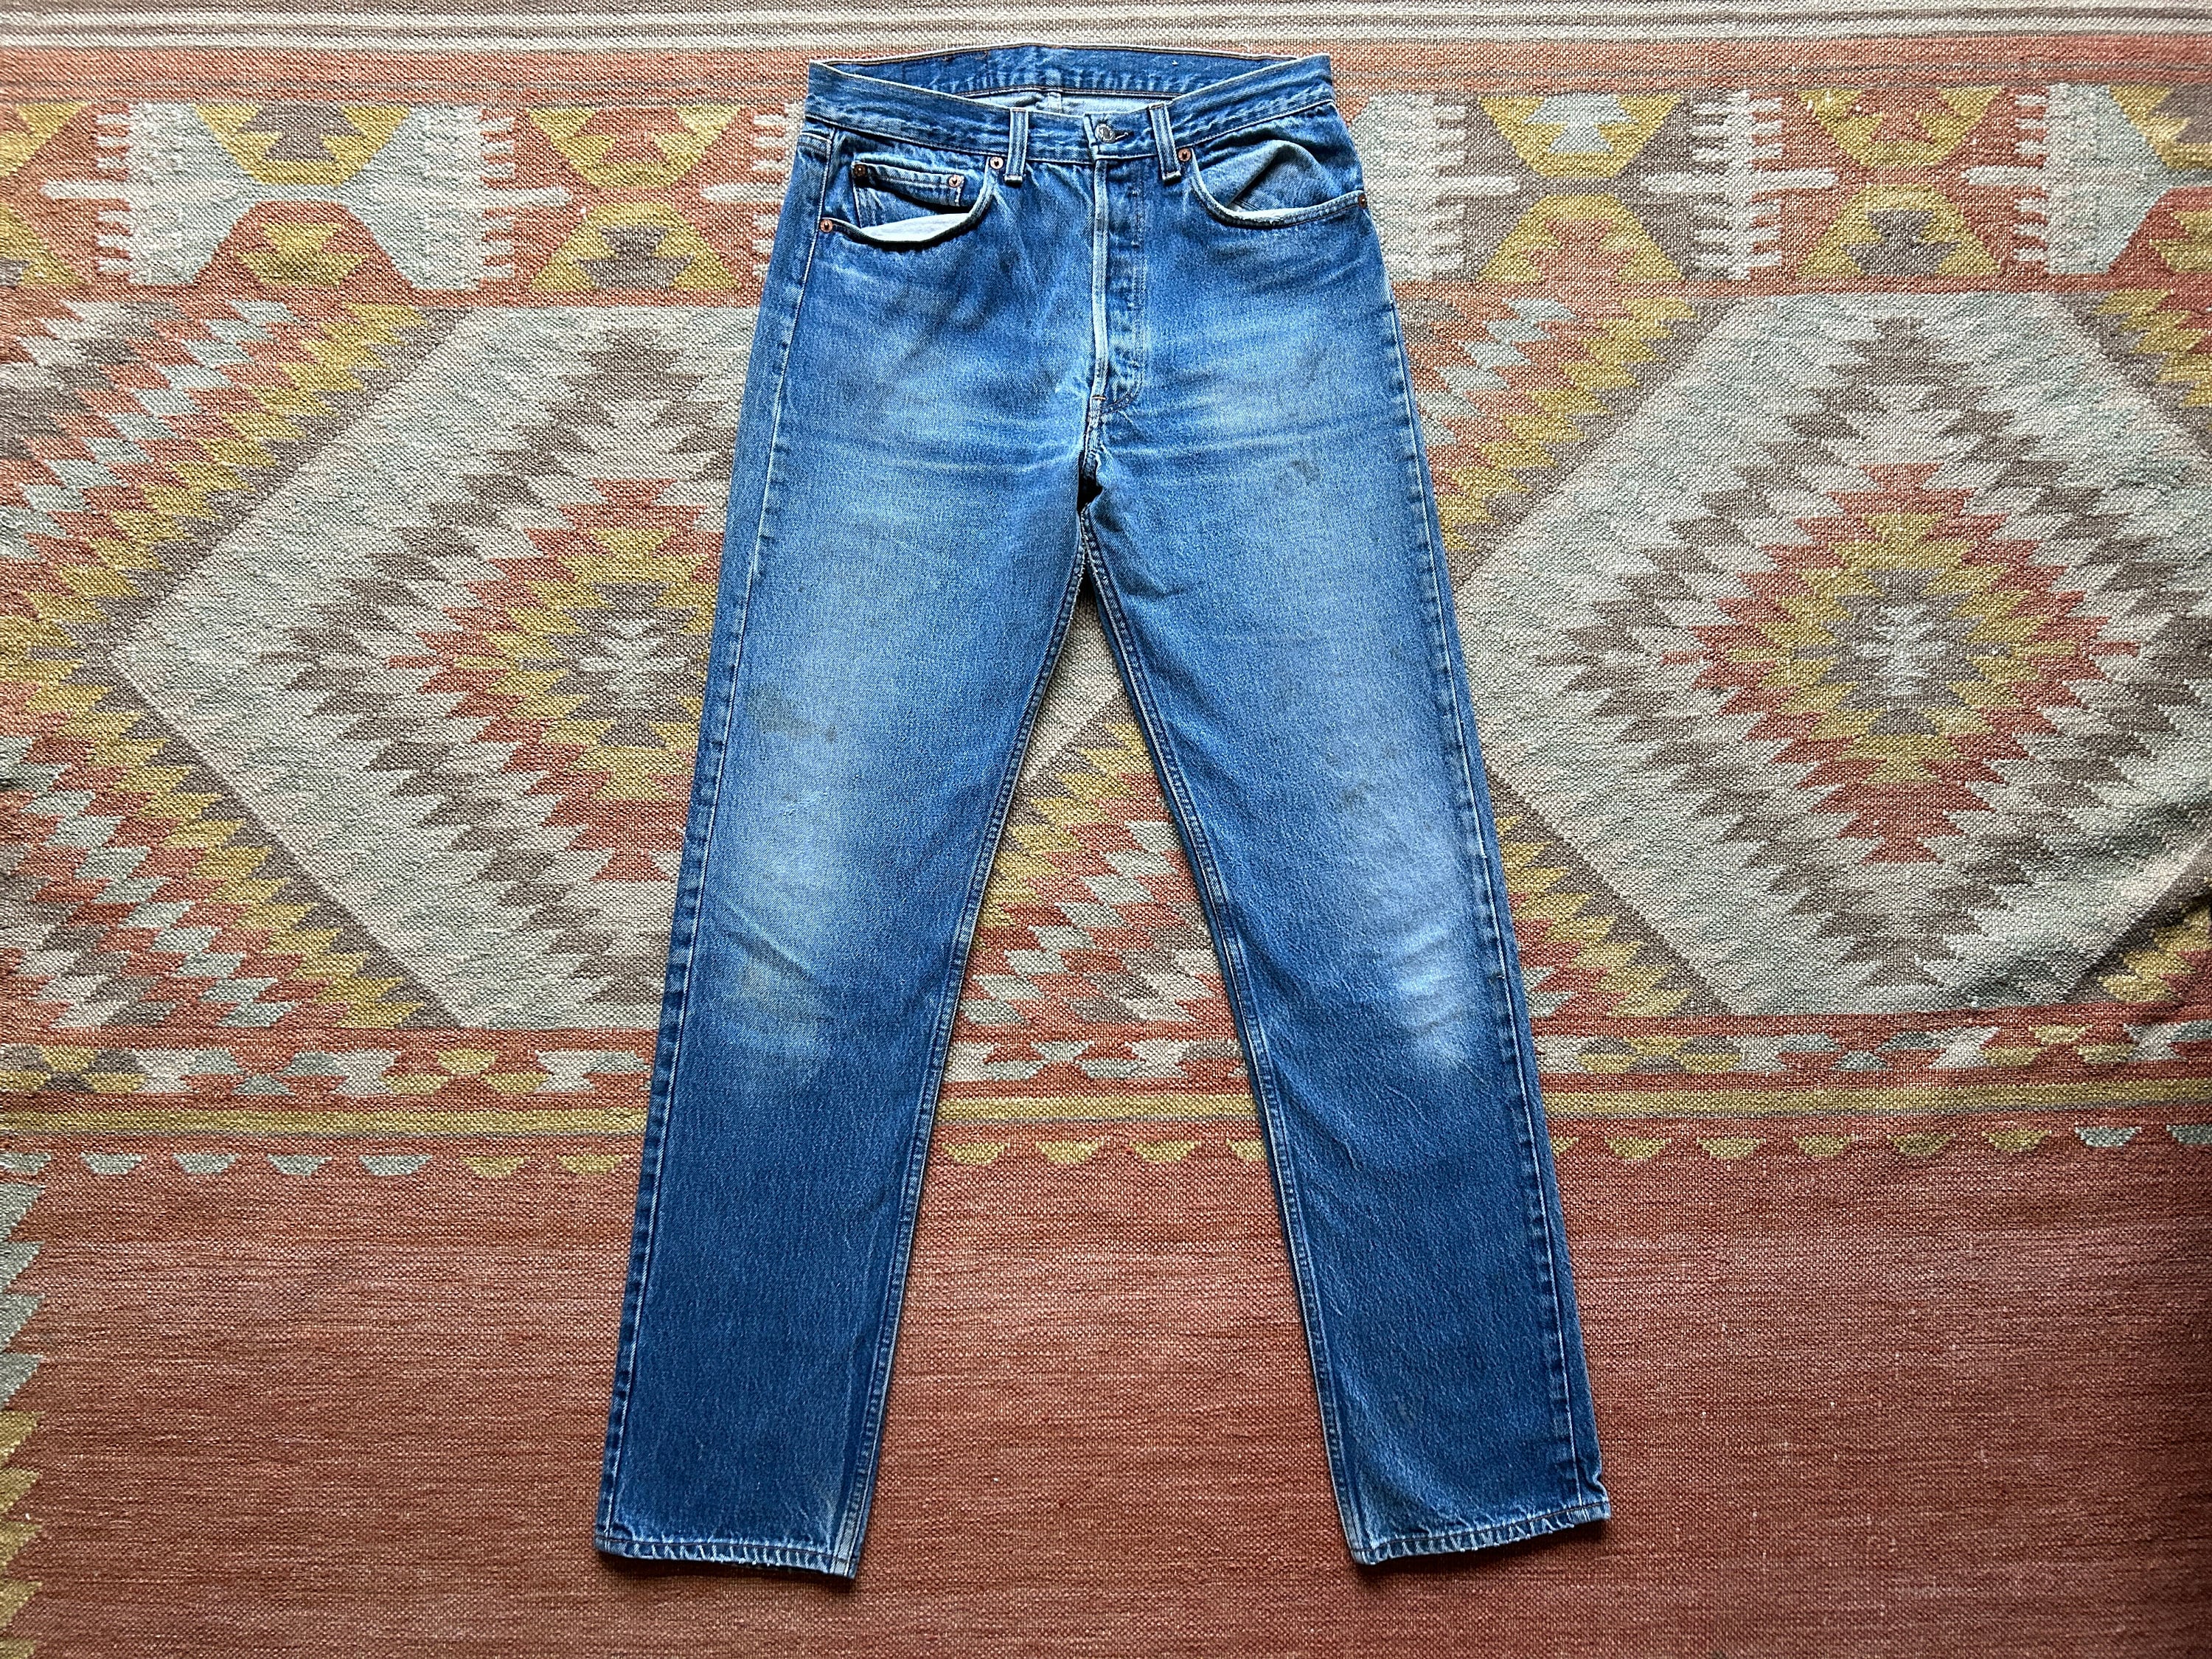 Stained Worn Jeans 